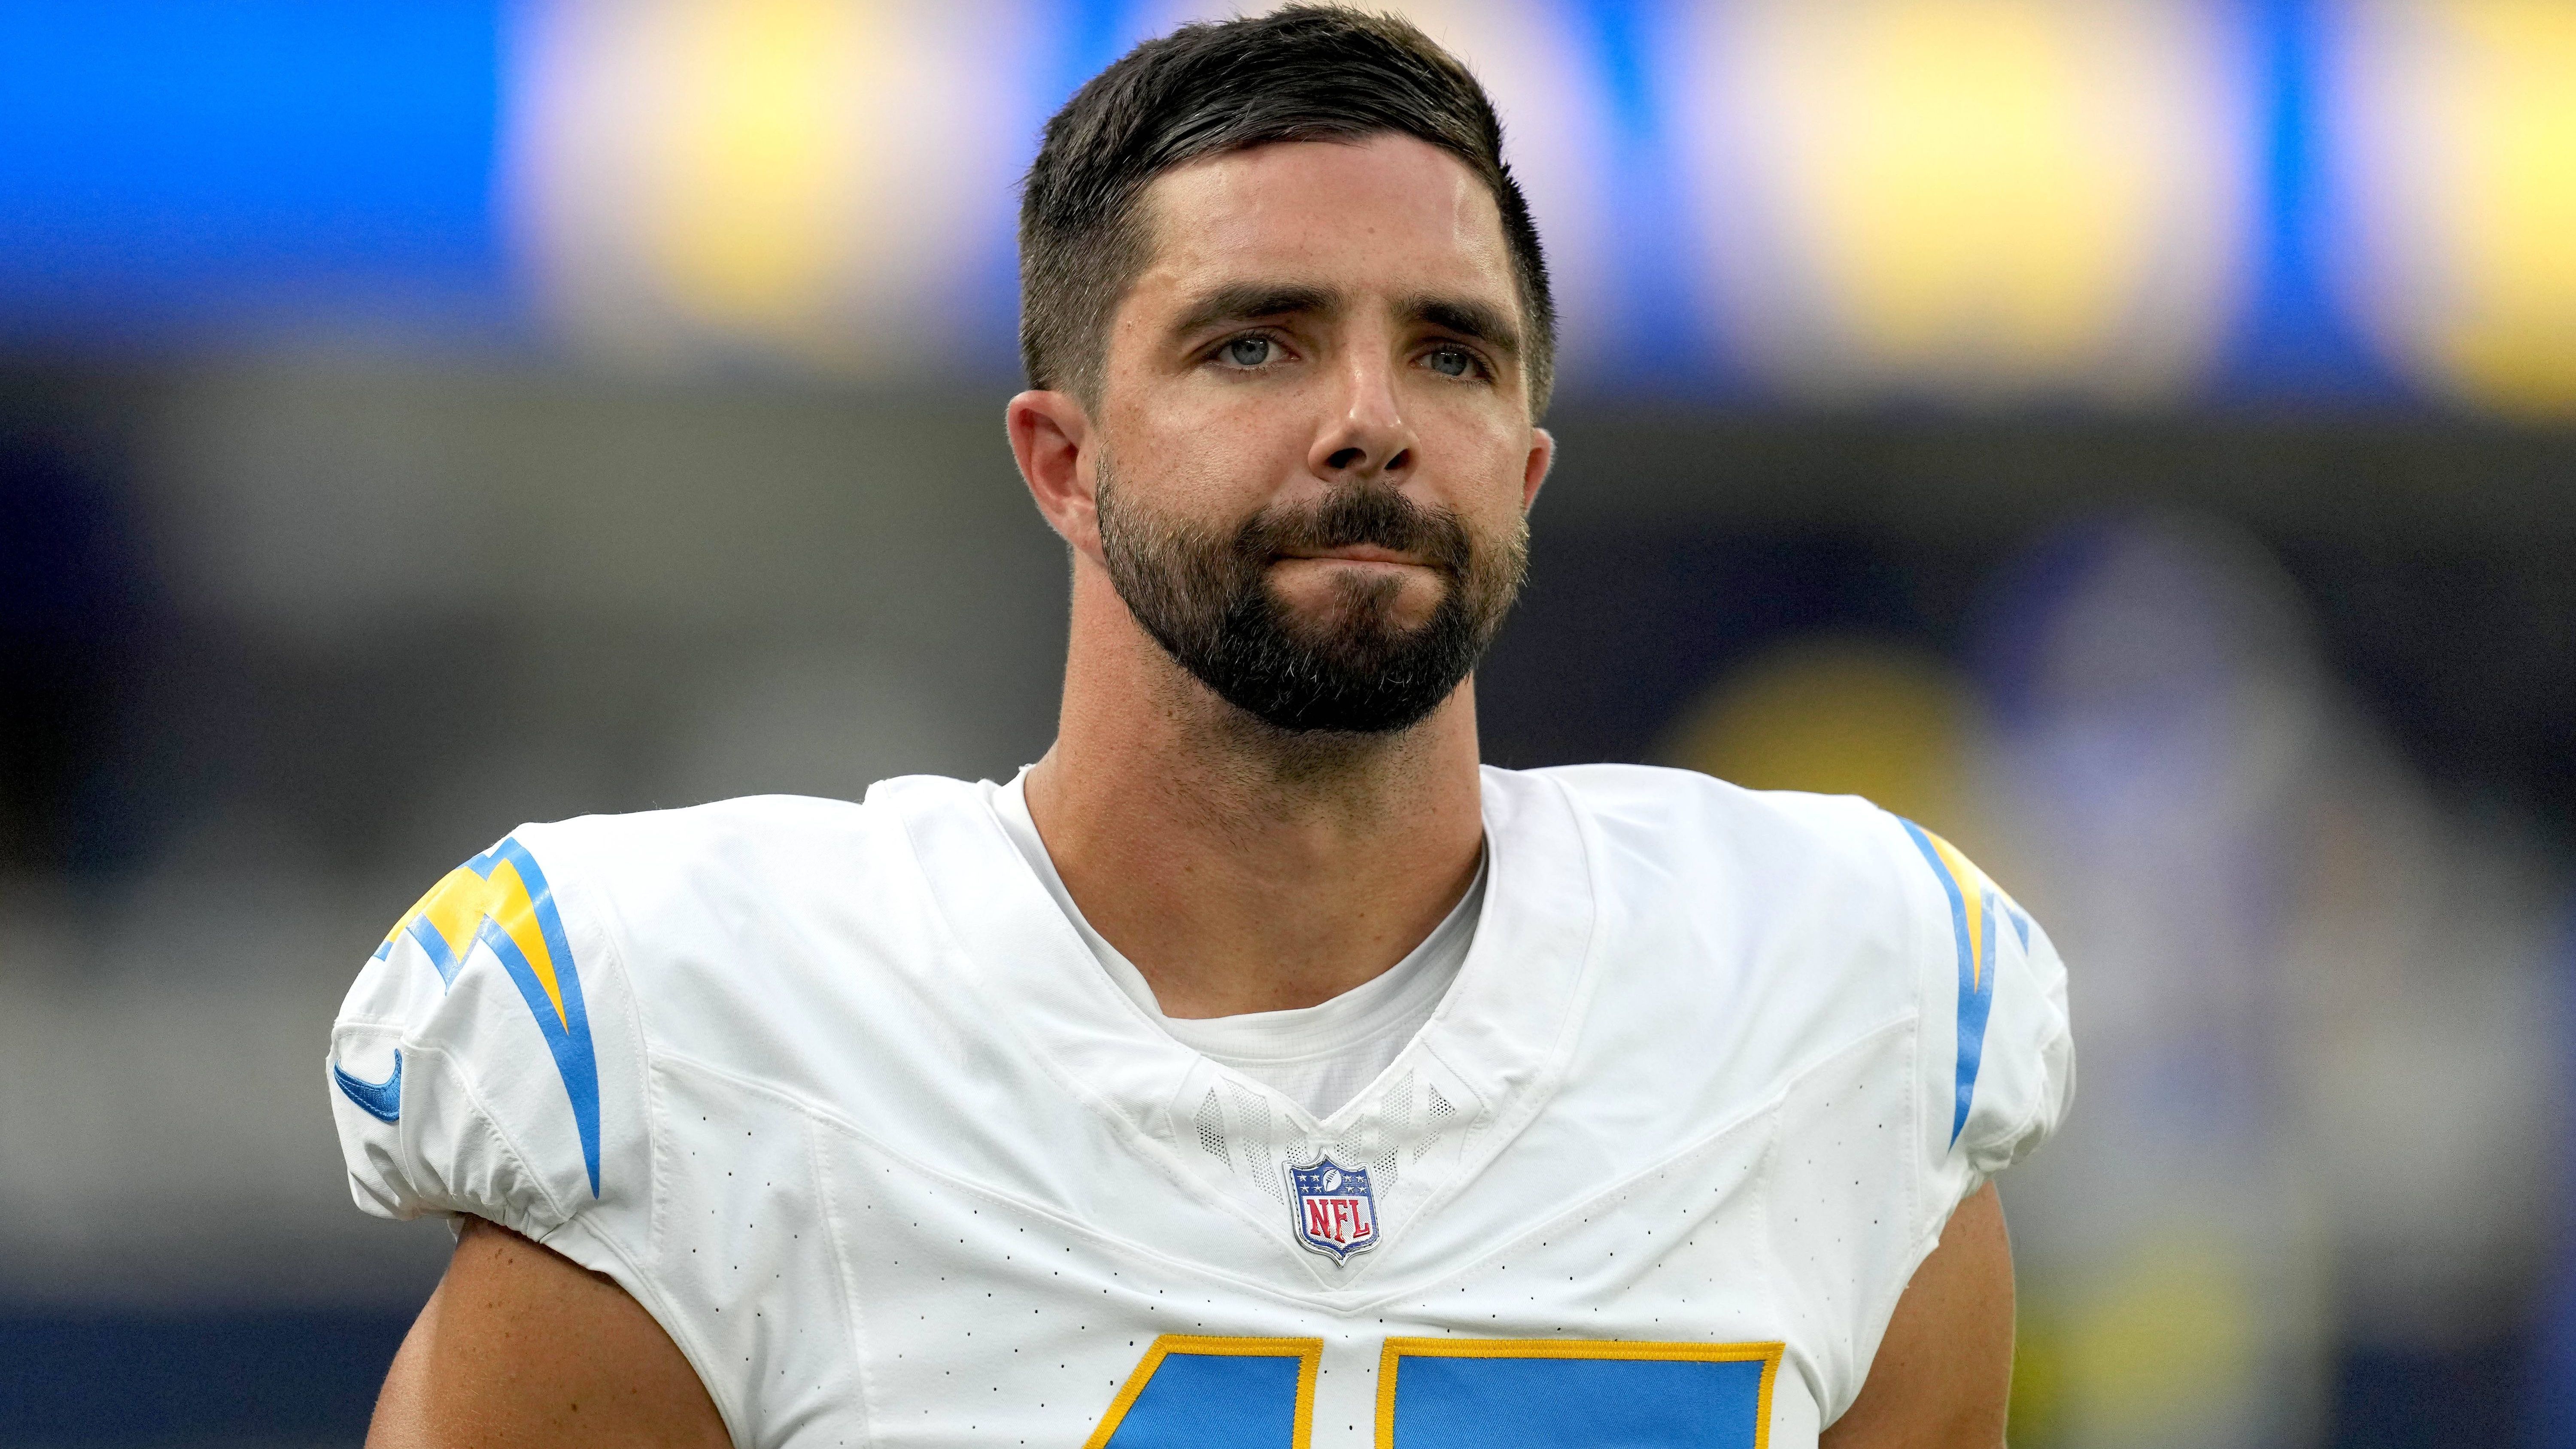 <strong>Los Angeles Chargers: Josh Harris<br></strong>Alter: 34 Jahre, 11 Monate und 14 Tage<br>Geburtsdatum: 27. April 1989<br>Position: Long Snapper